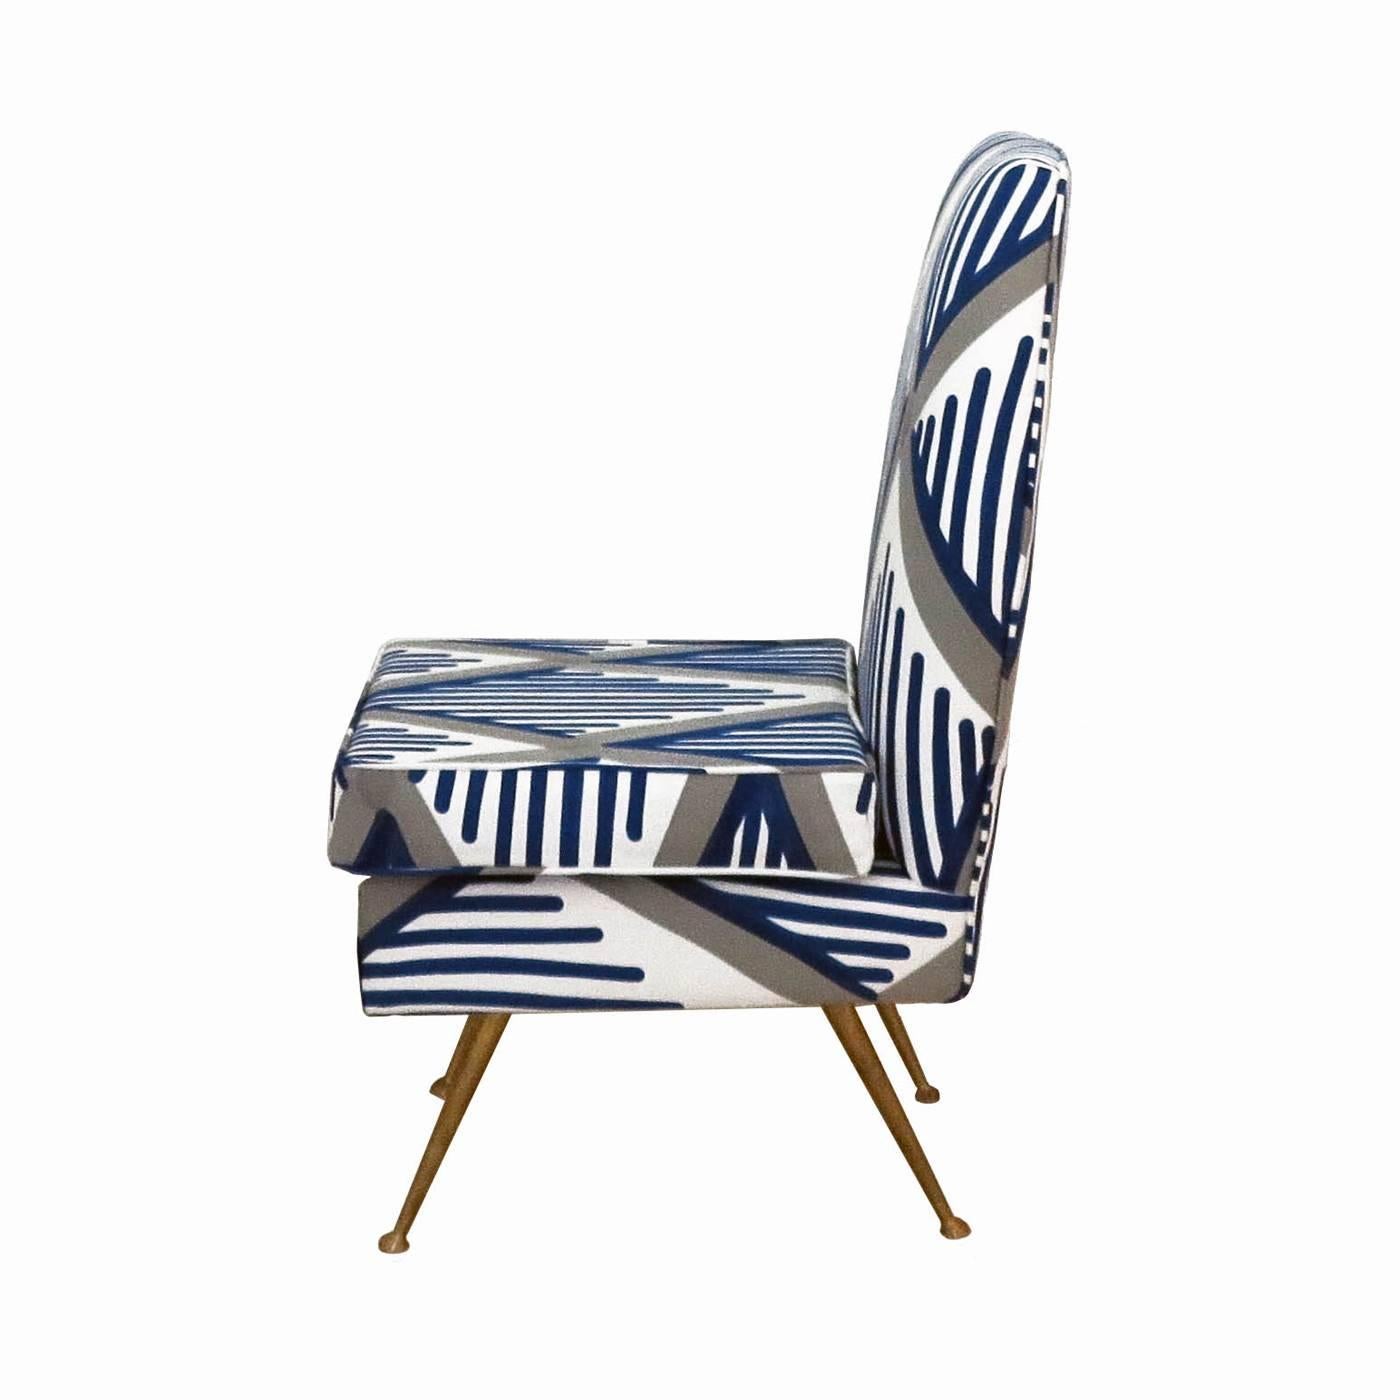 This elegant chair has a wood structure with brass feet. Its chair and seat are covered in 100% cotton decorated using the pigment printing technique with a geometric pattern of thick grey diamonds and blue parallel lines over a white background.